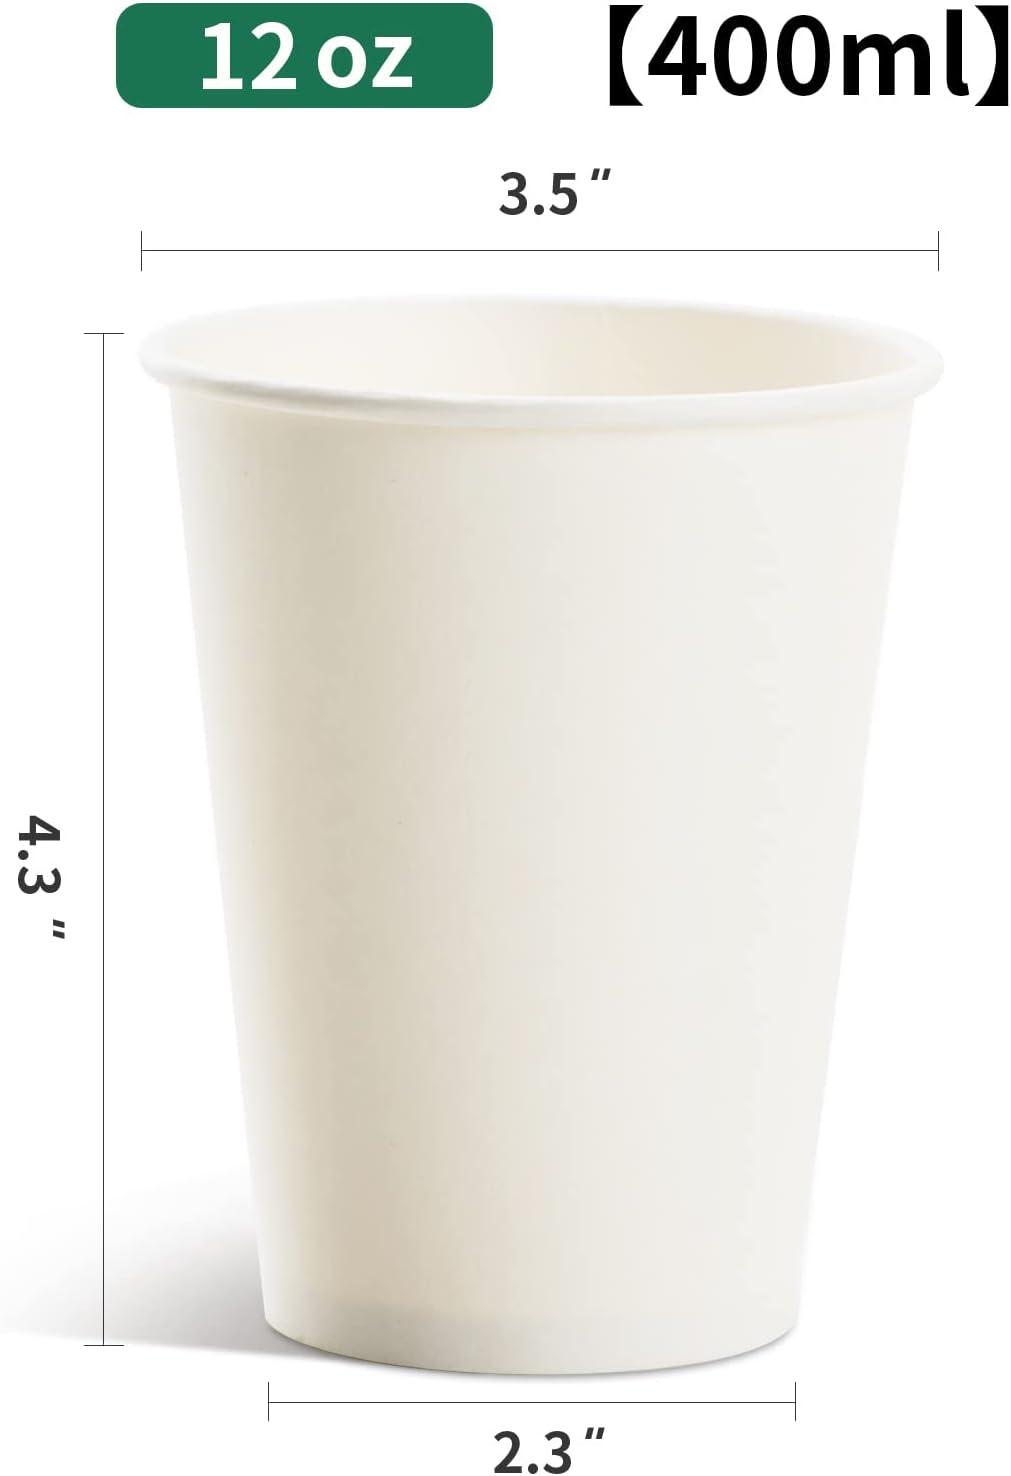 100 Pack] 8oz White Paper Coffee Cups - Disposable Paper Cups